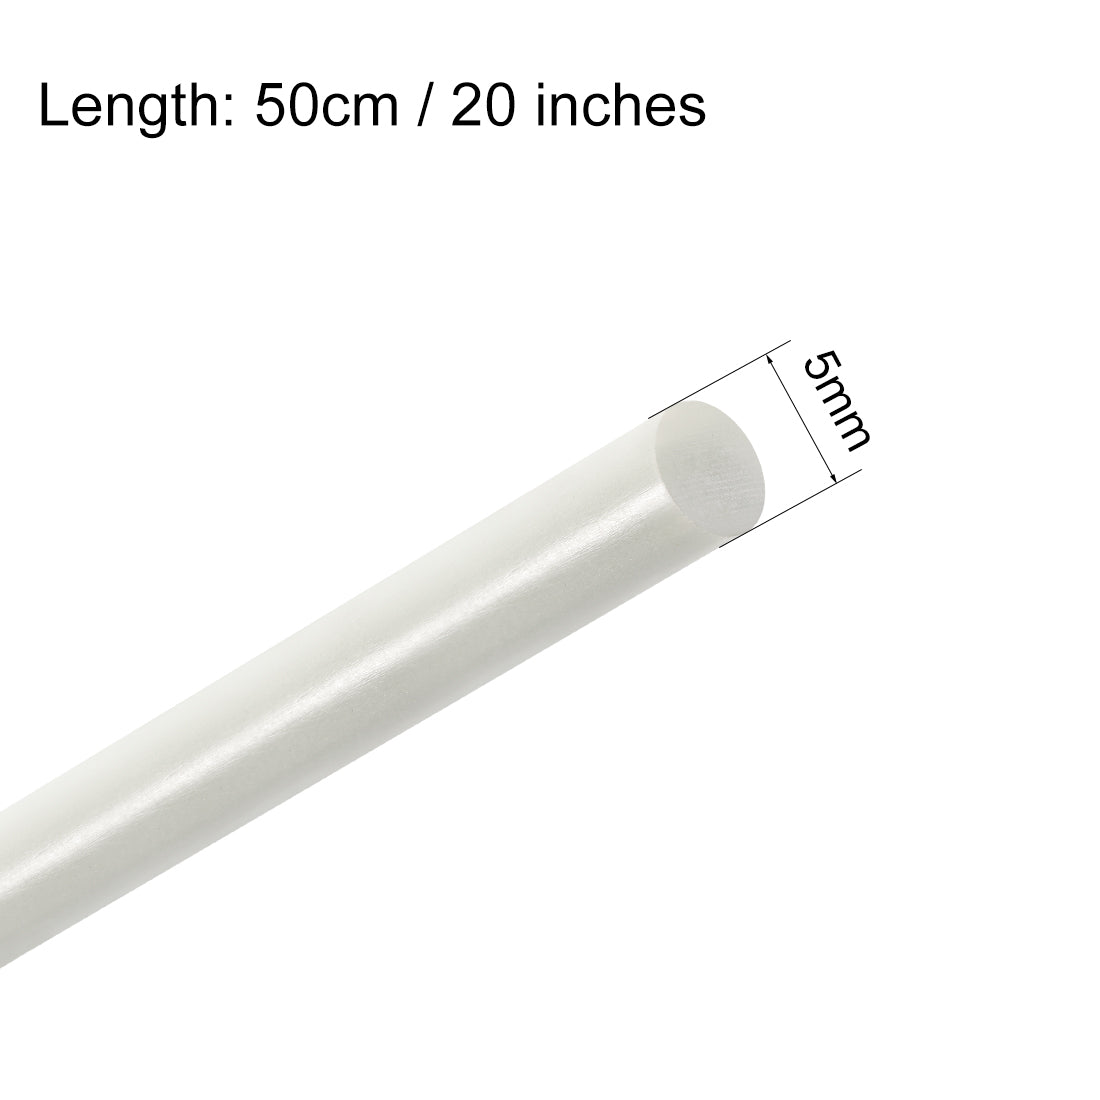 uxcell Uxcell FRP Fiberglass Round Rod,5mm Dia 50cm Long,White Engineering Round Bars 3pcs